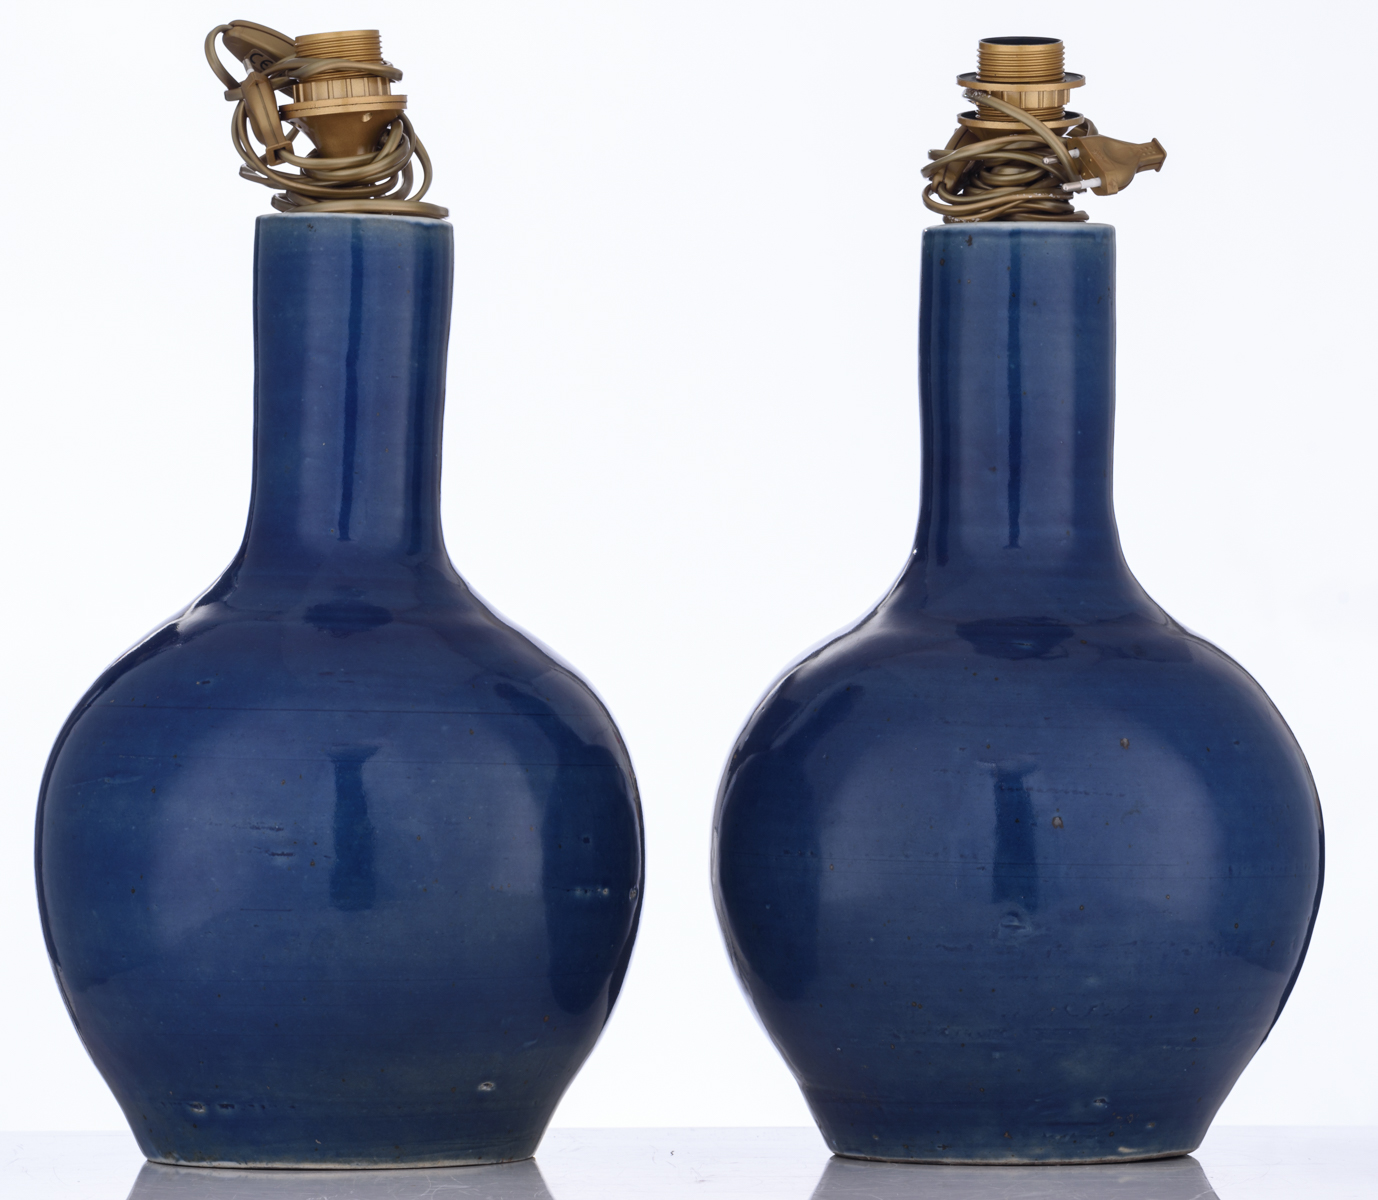 Two Chinese lavender blue glazed bottle vases, early 20thC, mounted as a lamp, H 41,5 cm - Image 5 of 7